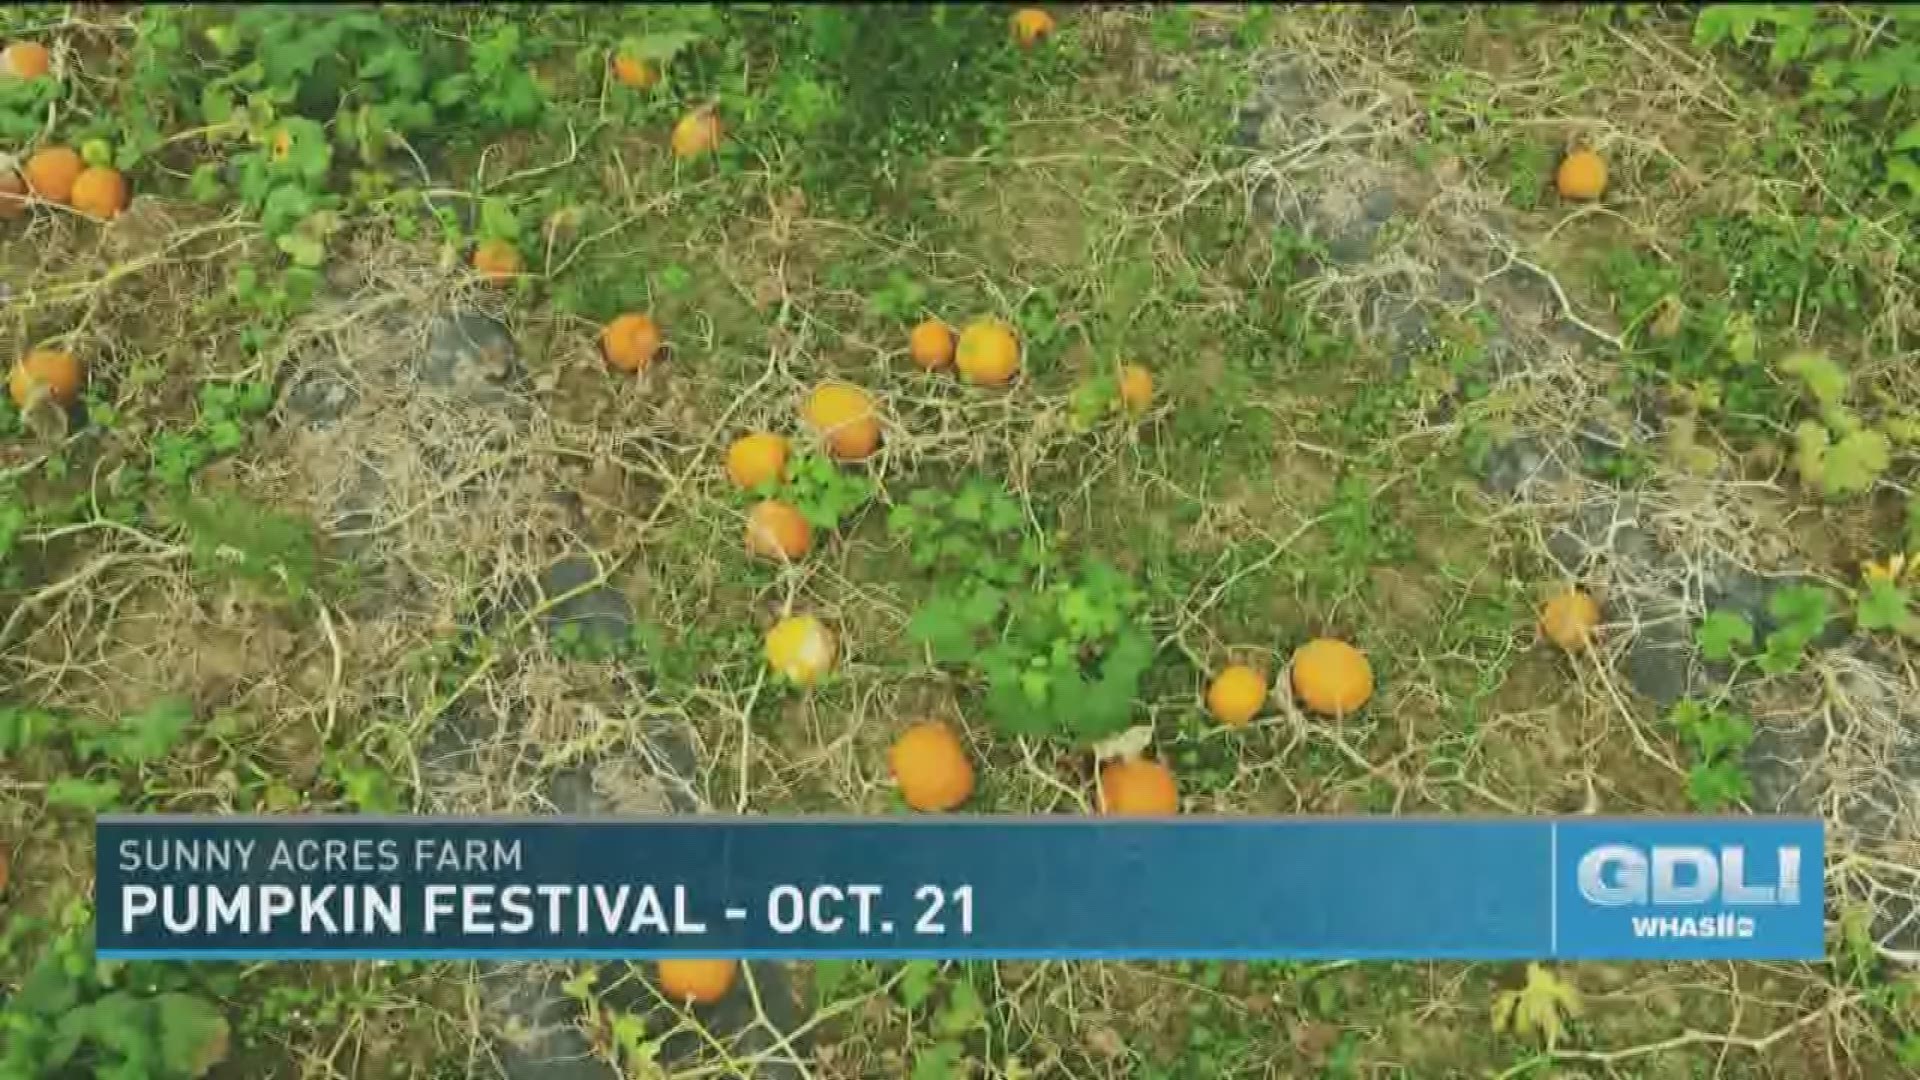 The U-pick pumpkin season starts next week and continues on Saturdays and Sundays through the Pumpkin Festival on October 21, 2018